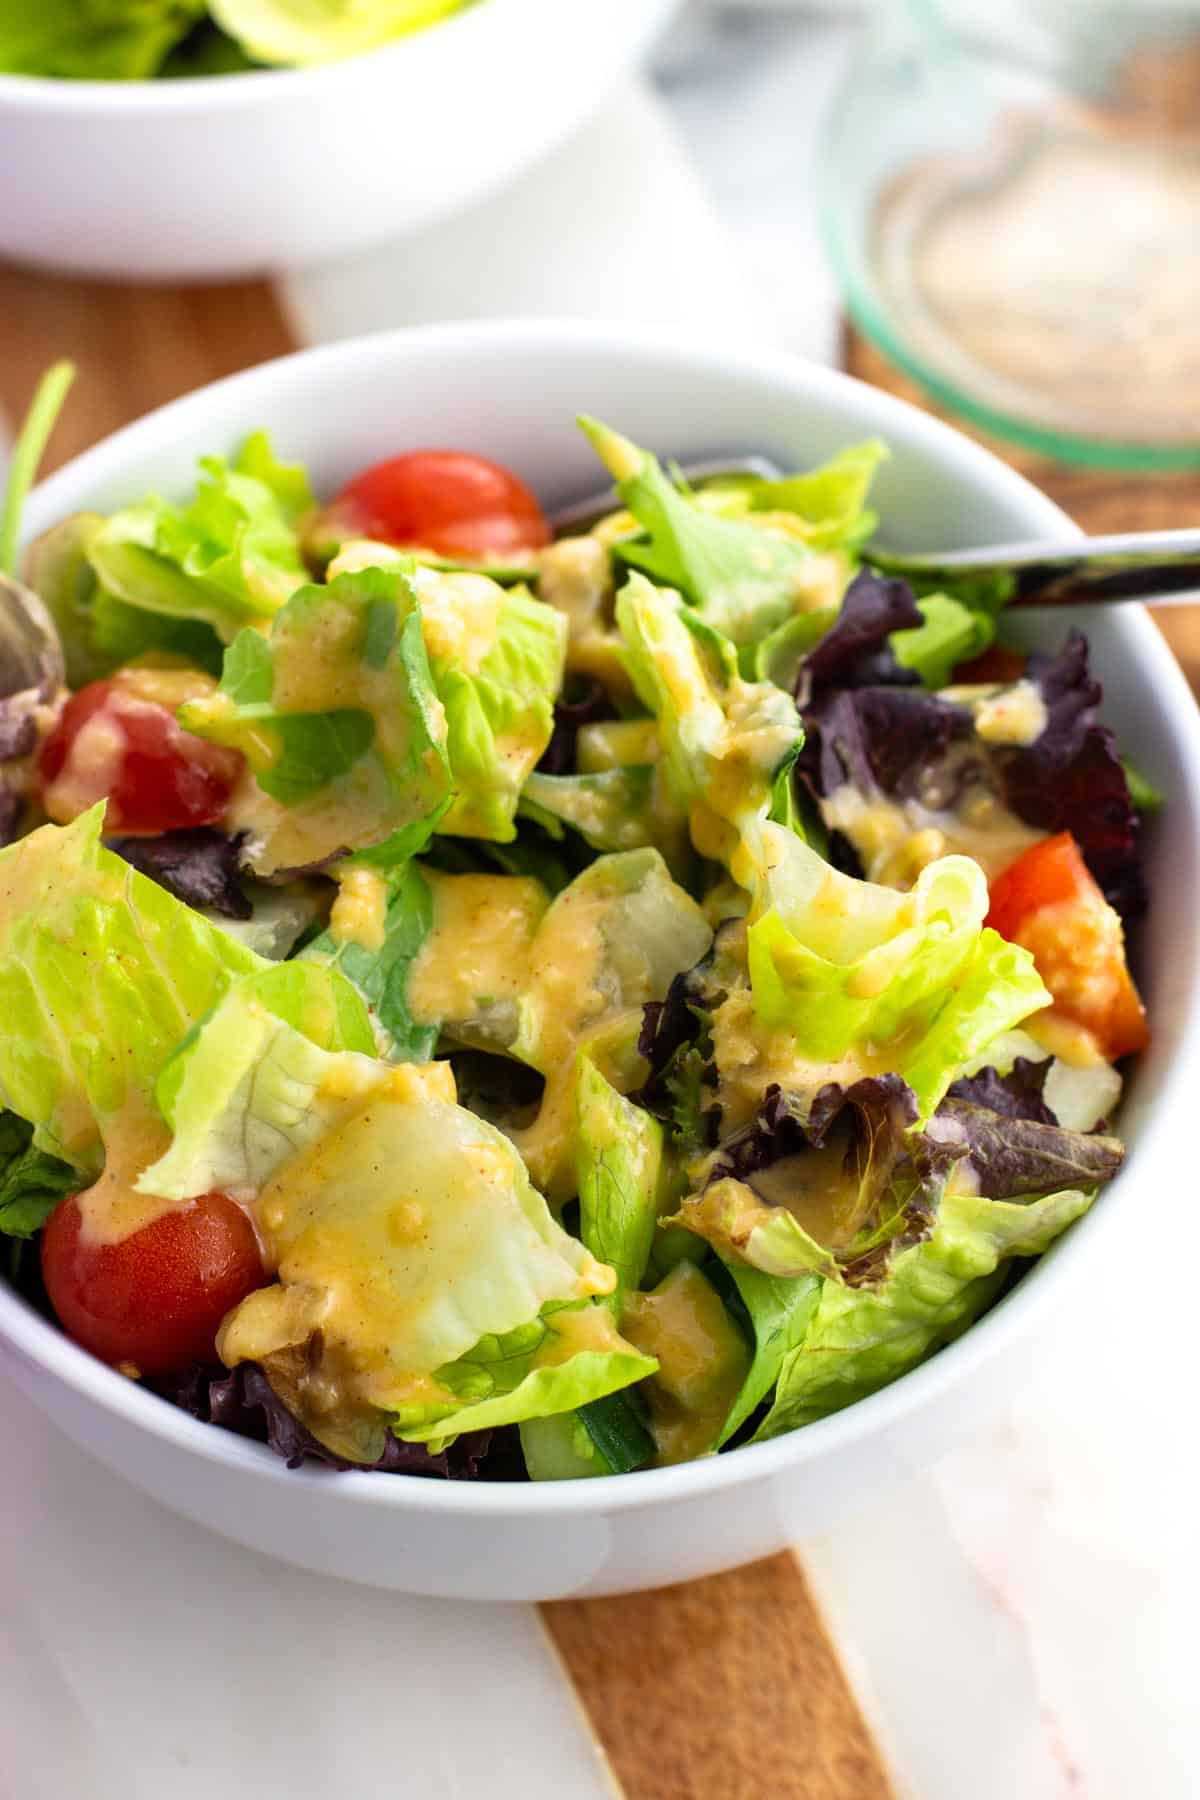 A bowl of salad dressed with hummus salad dressing.